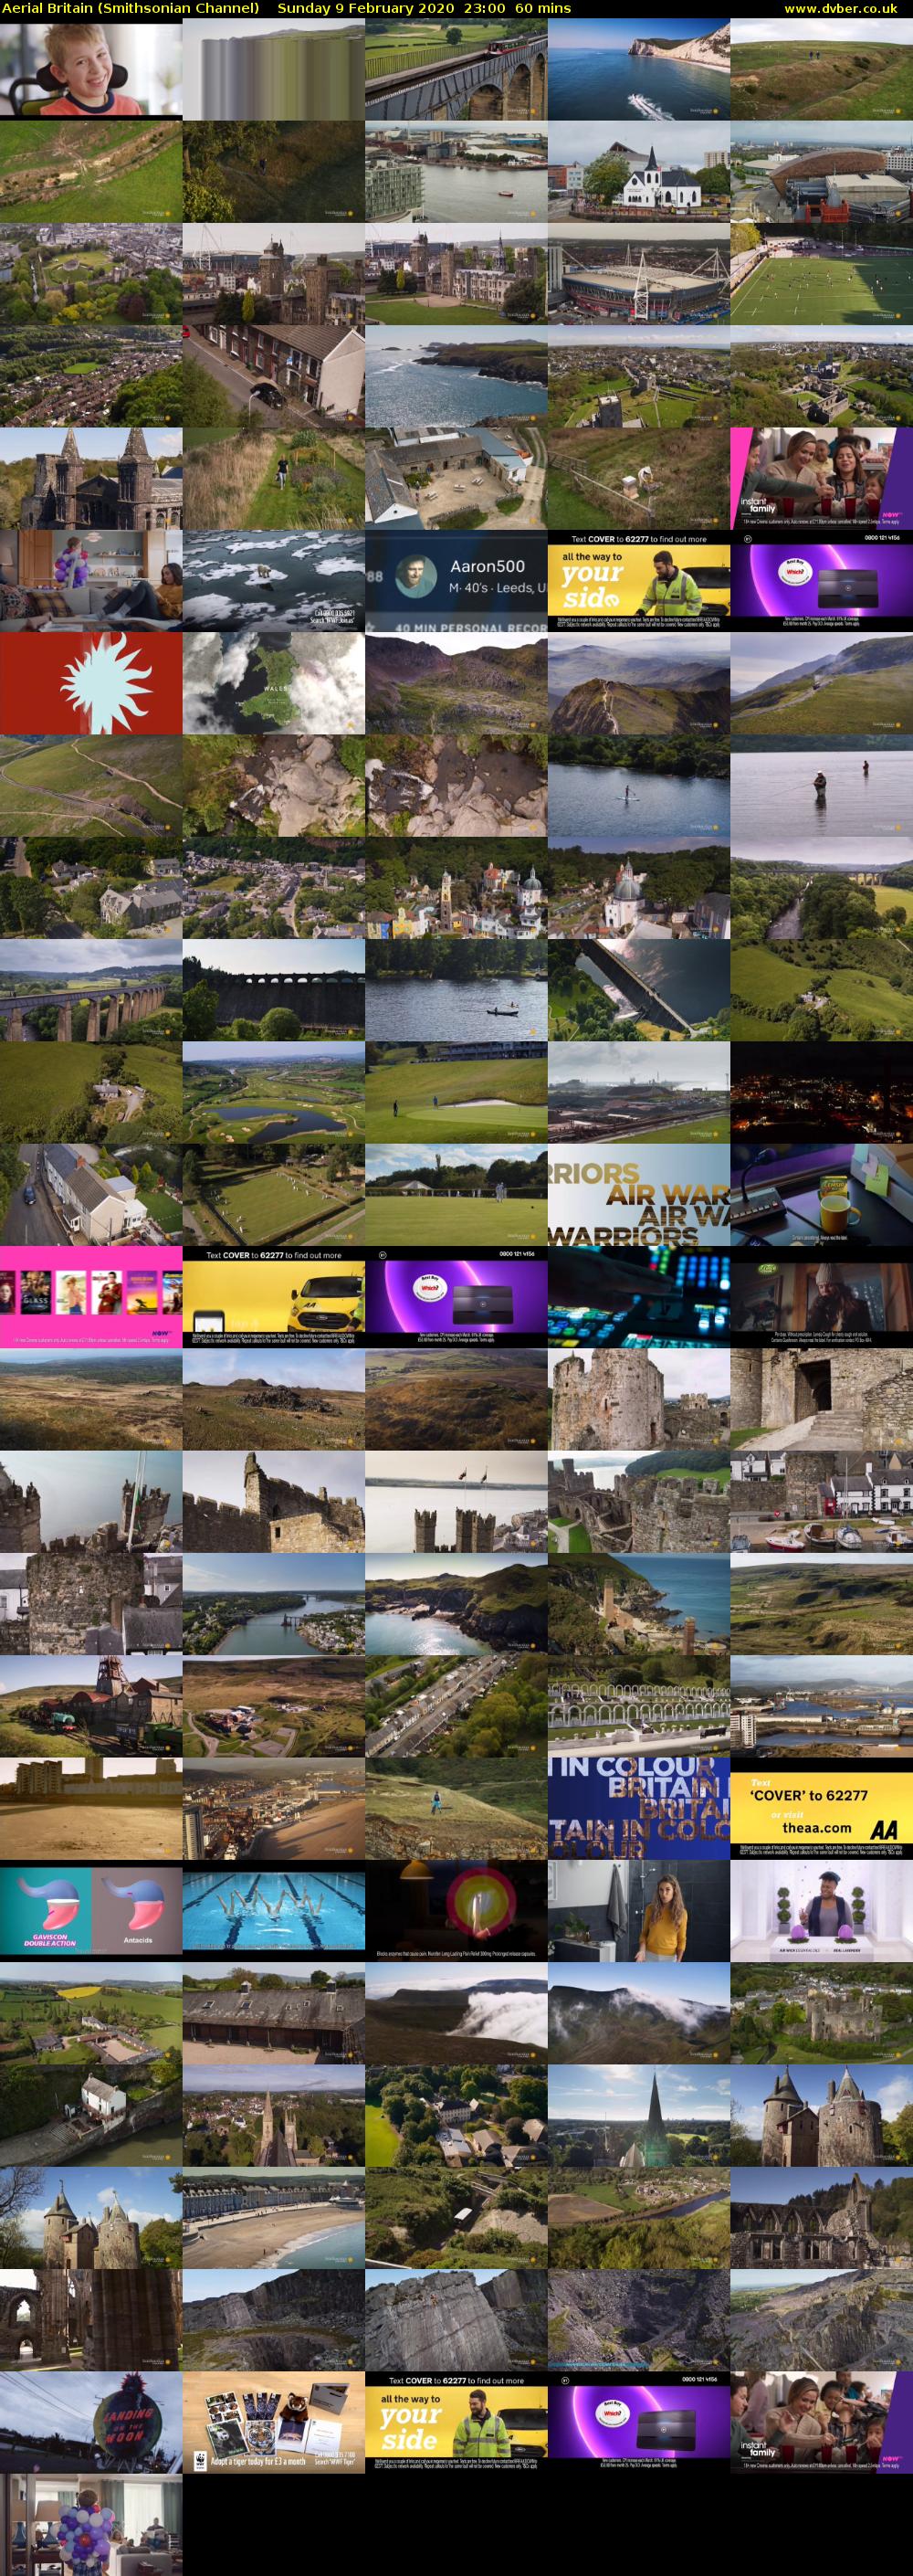 Aerial Britain (Smithsonian Channel) Sunday 9 February 2020 23:00 - 00:00